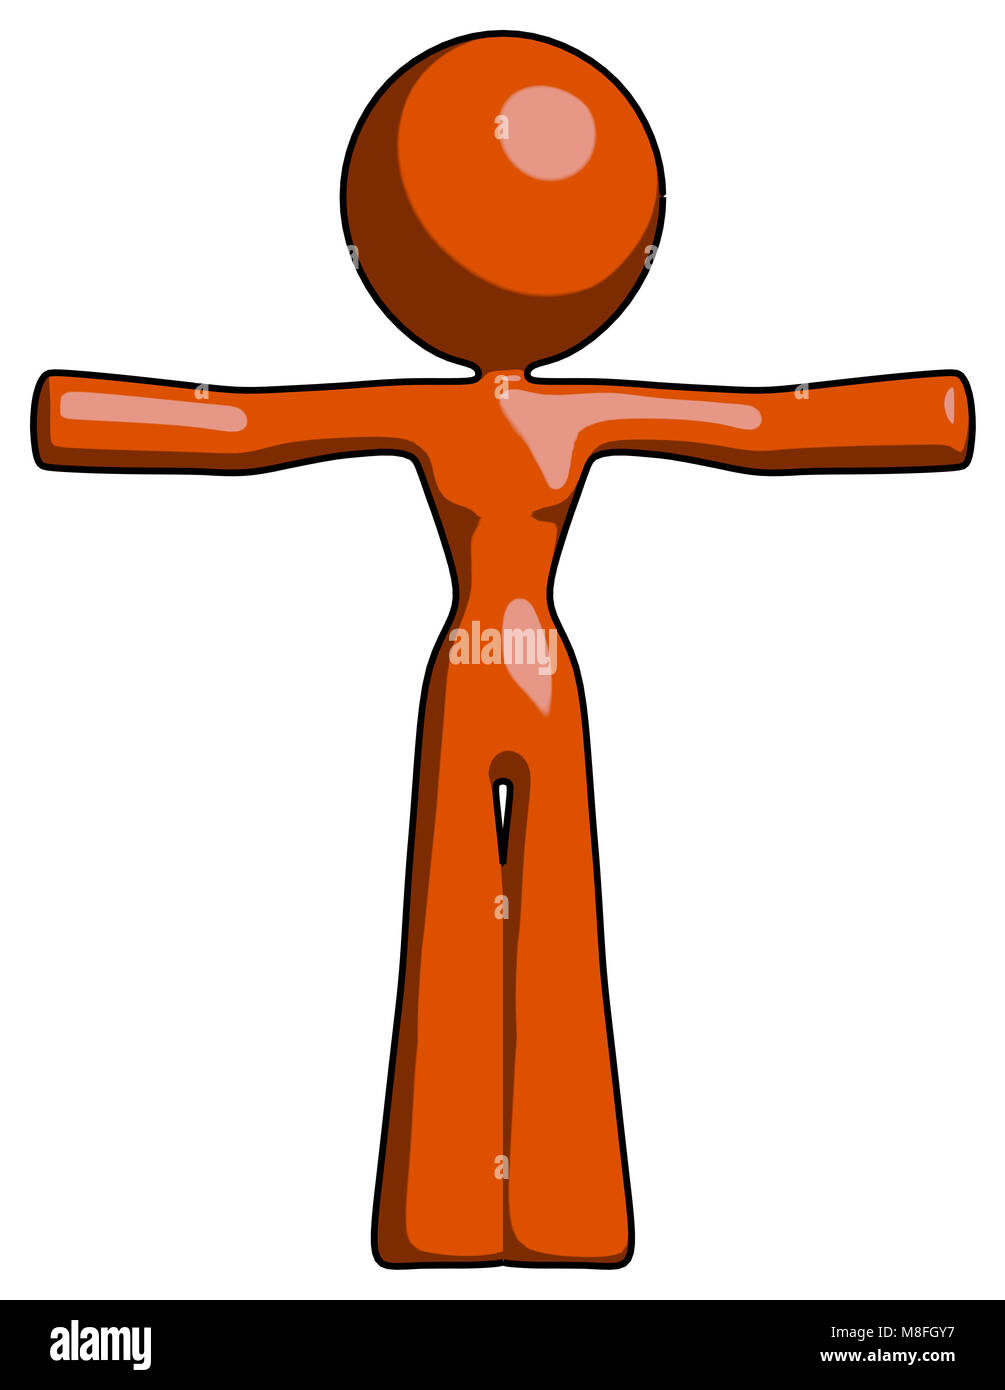 Strong Athletic Man T-pose Stock Photo 34517914 | Shutterstock